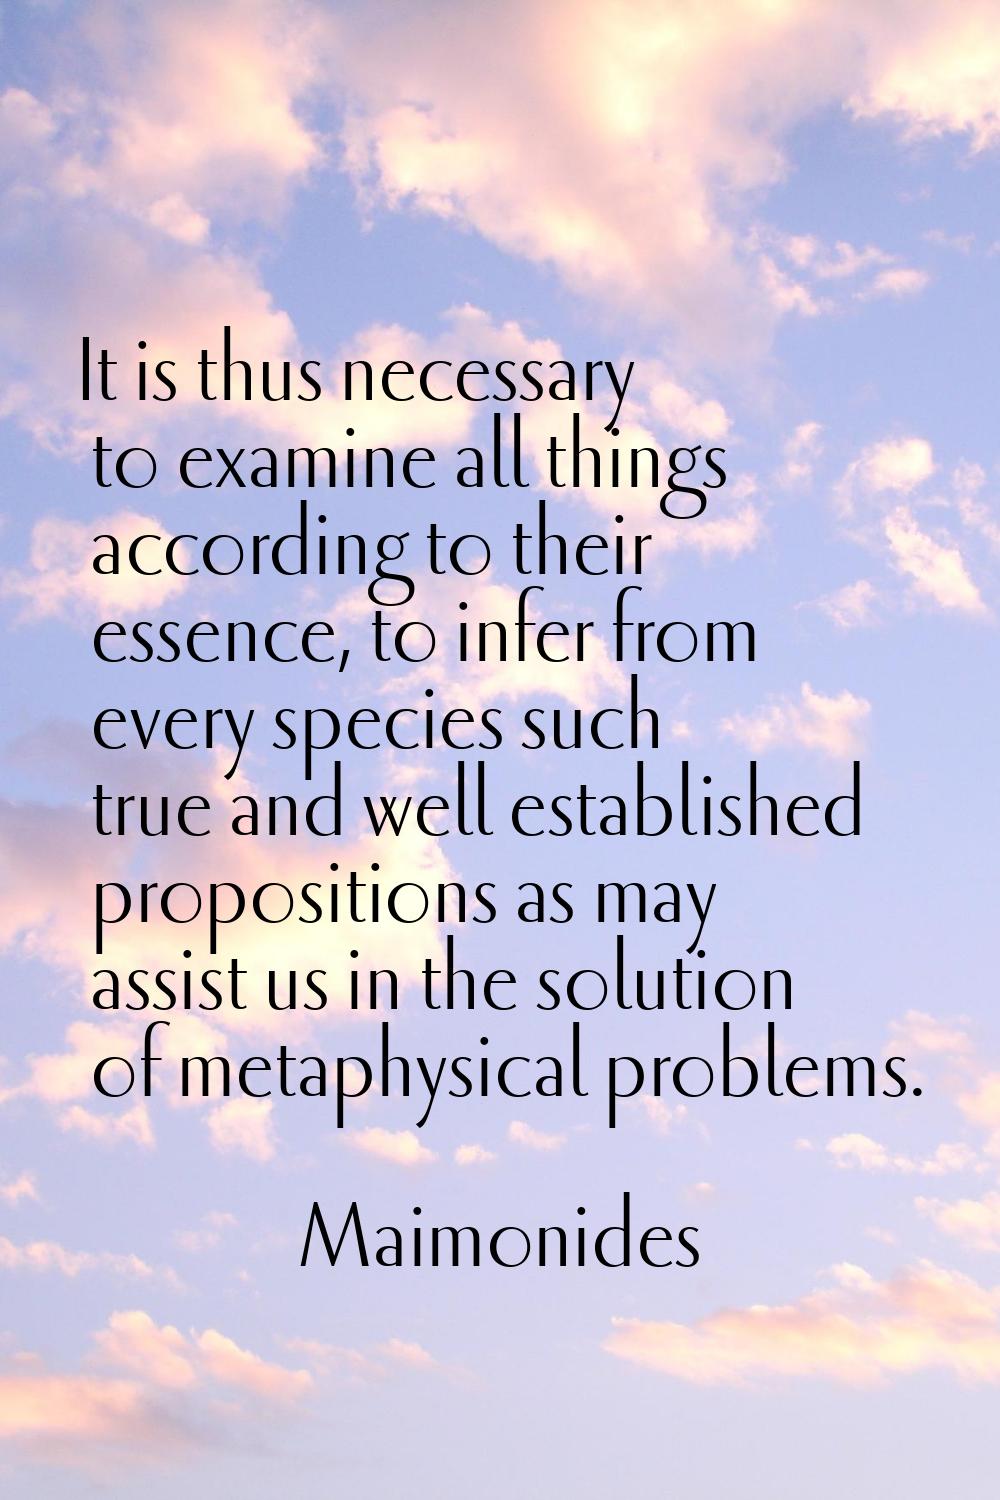 It is thus necessary to examine all things according to their essence, to infer from every species 